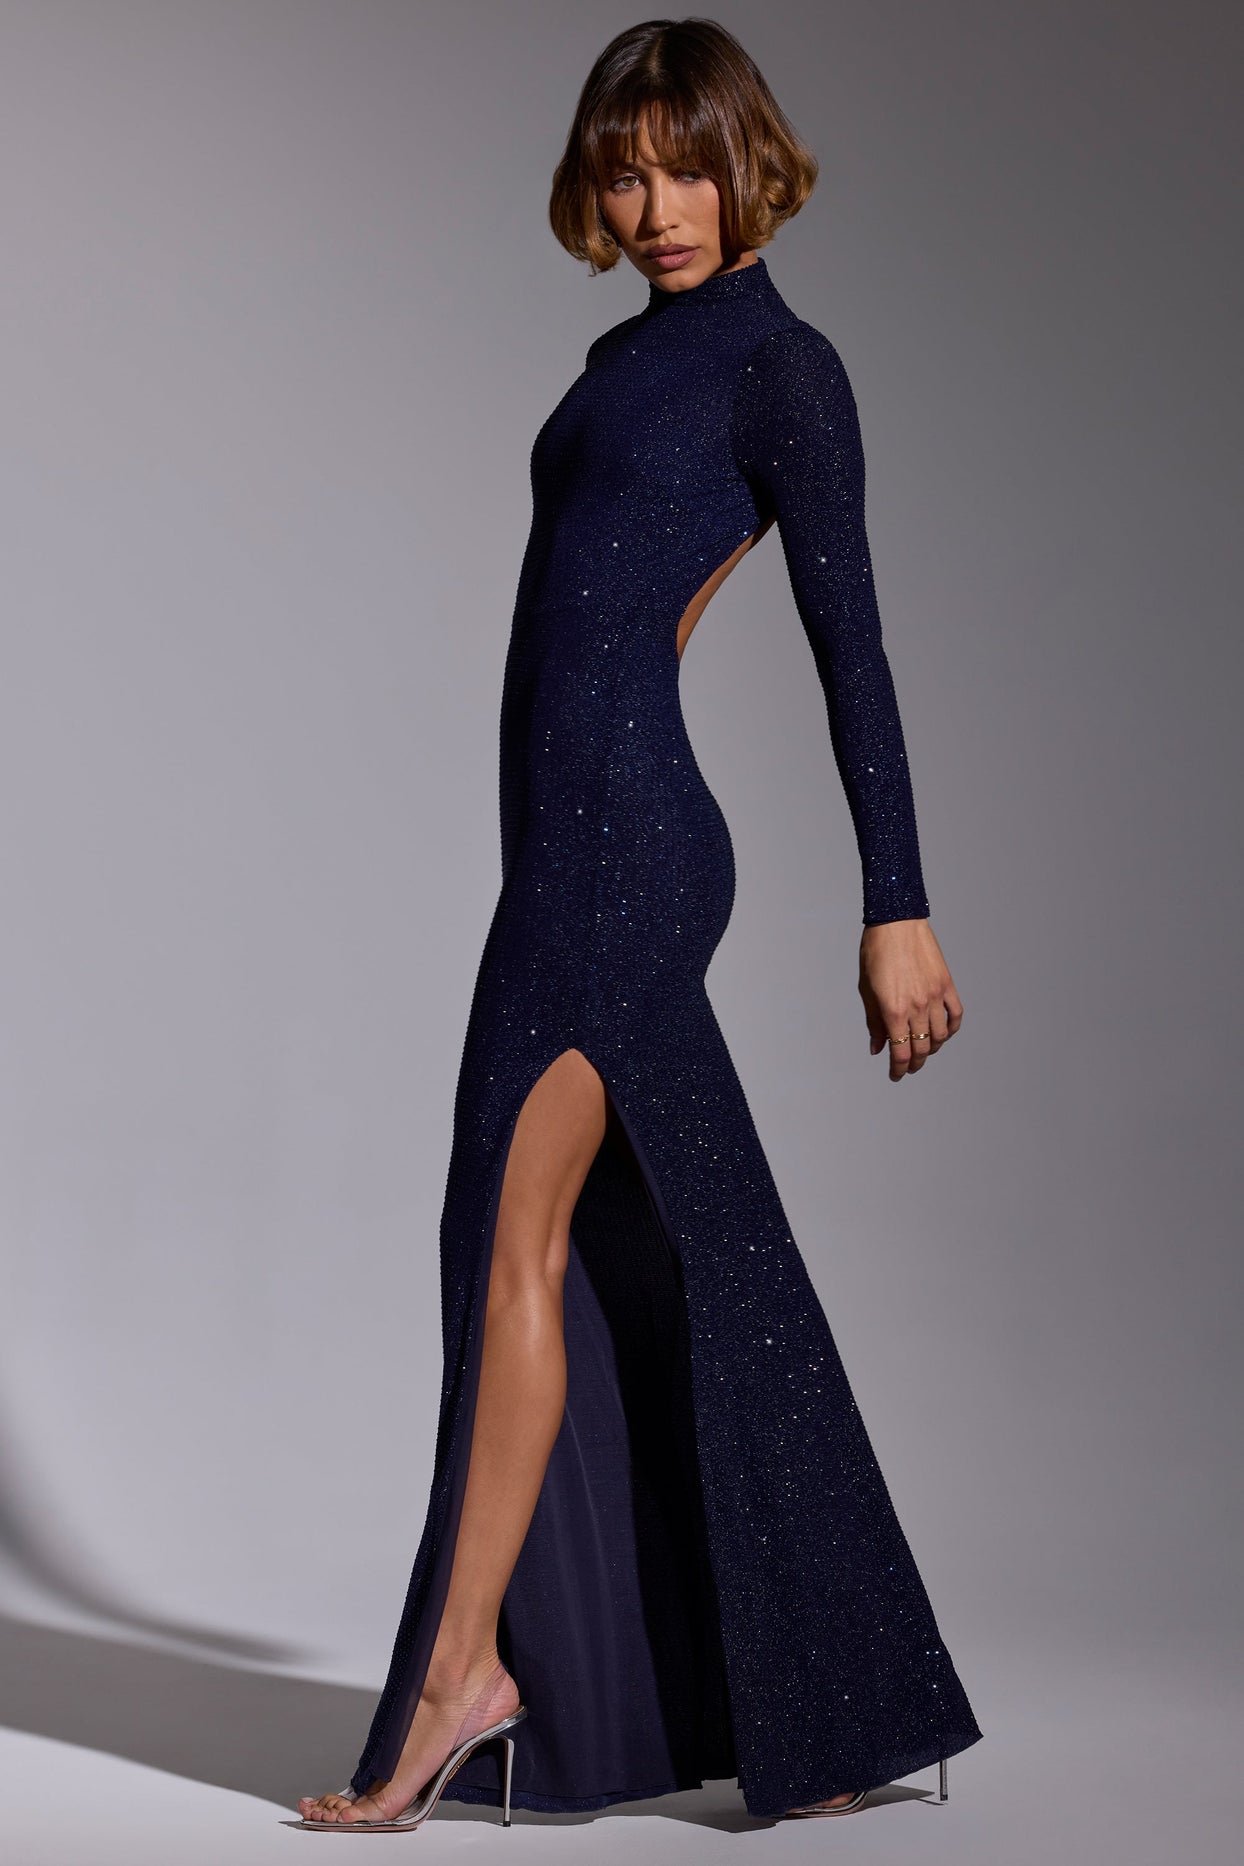 Embellished Long Sleeve Evening Gown in Royal Indigo